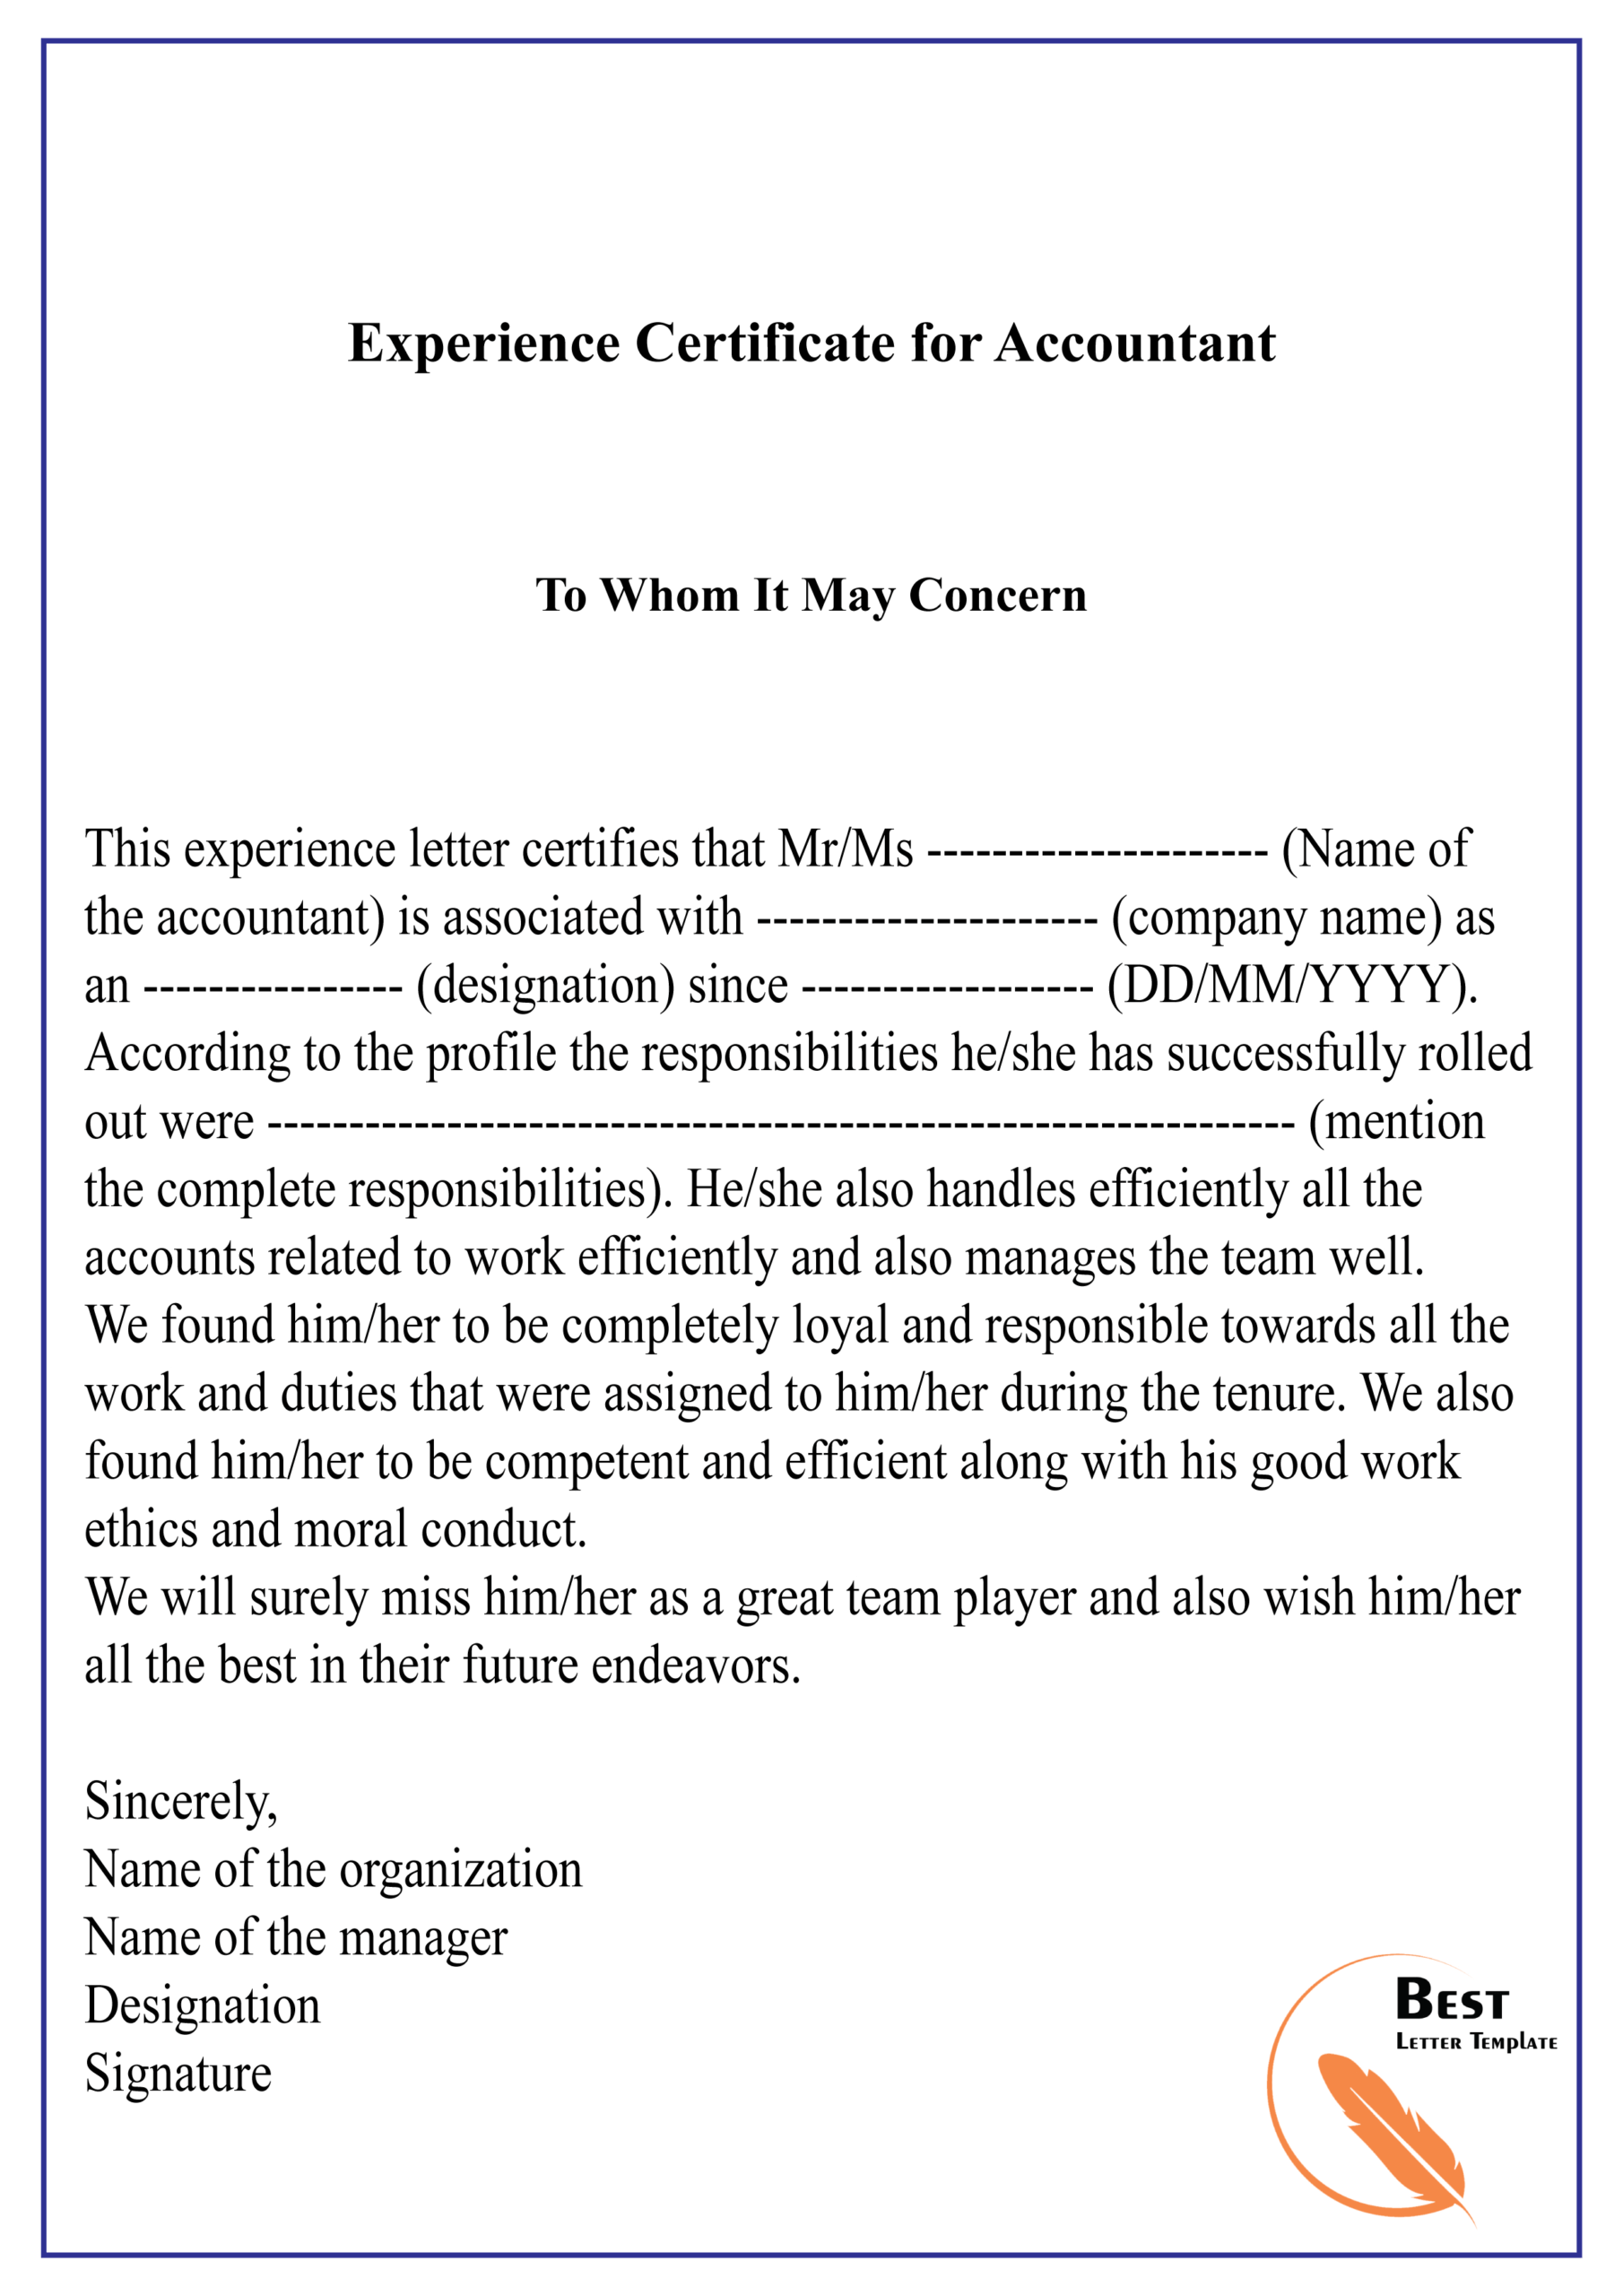 Experience Certificate For Accountant 01 | Best Letter Template Regarding Template Of Experience Certificate